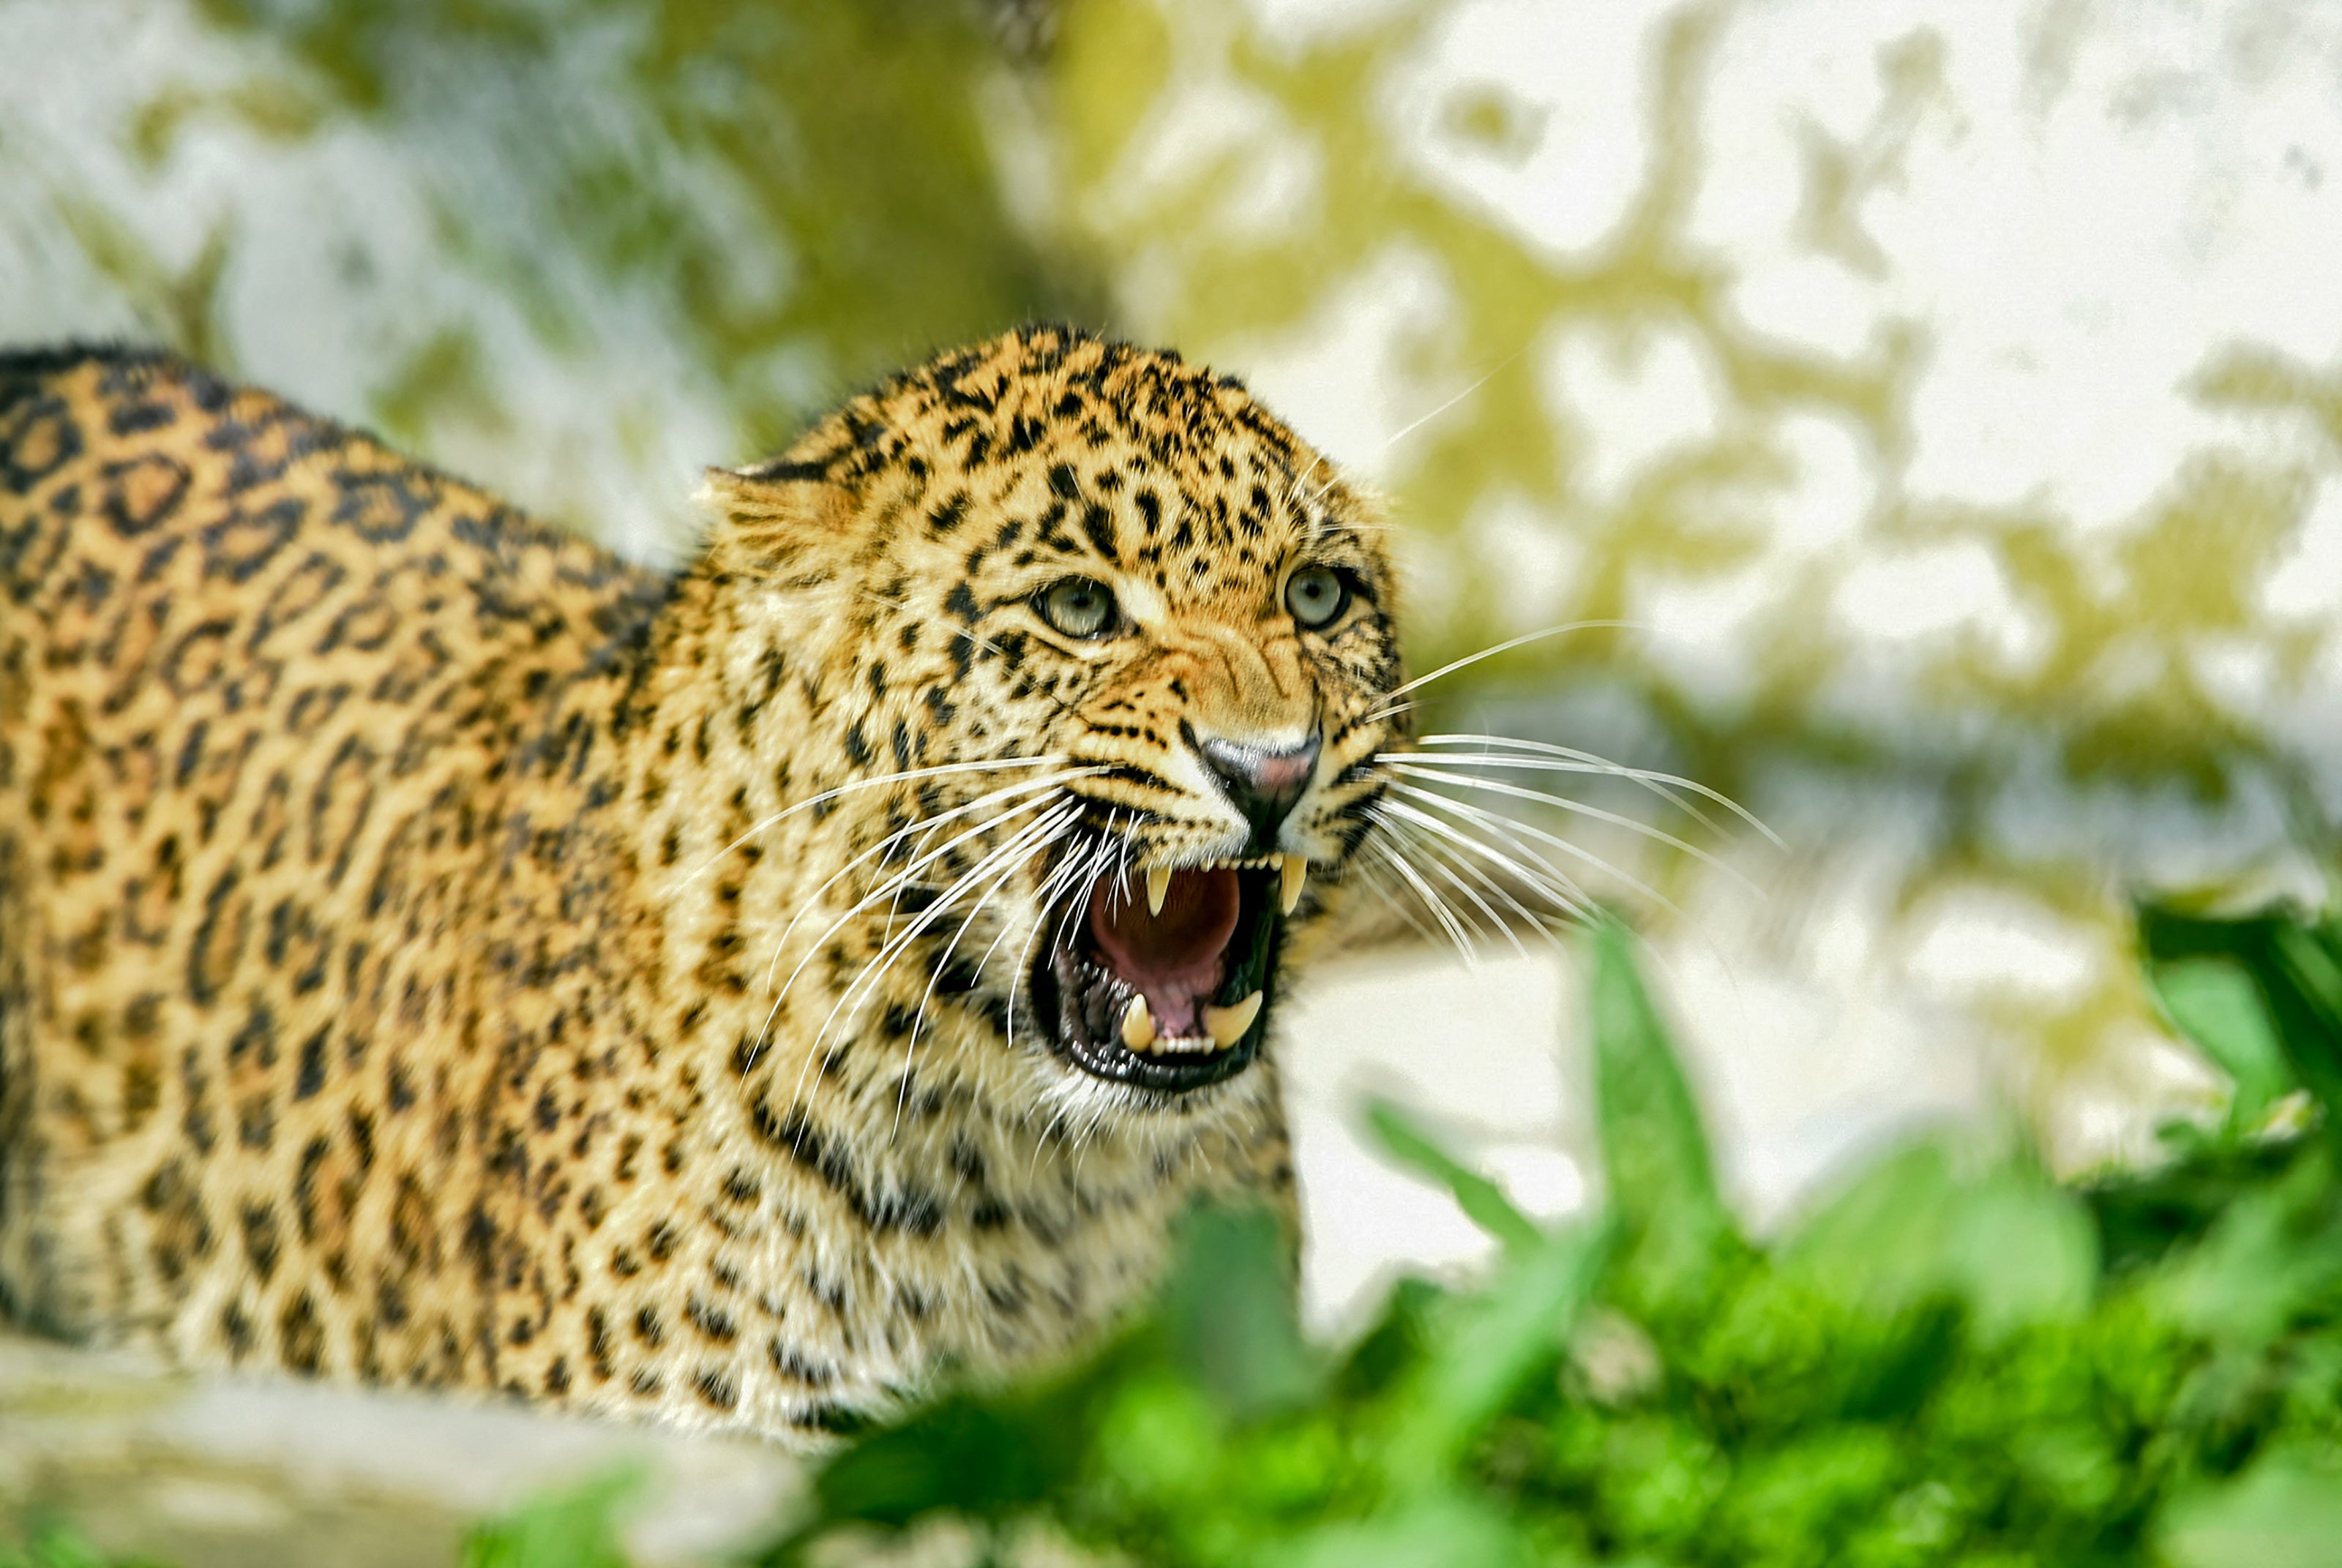 Representative: A leopard reacts as it walks inside the Dachigam National Park in India on 10 April 2020